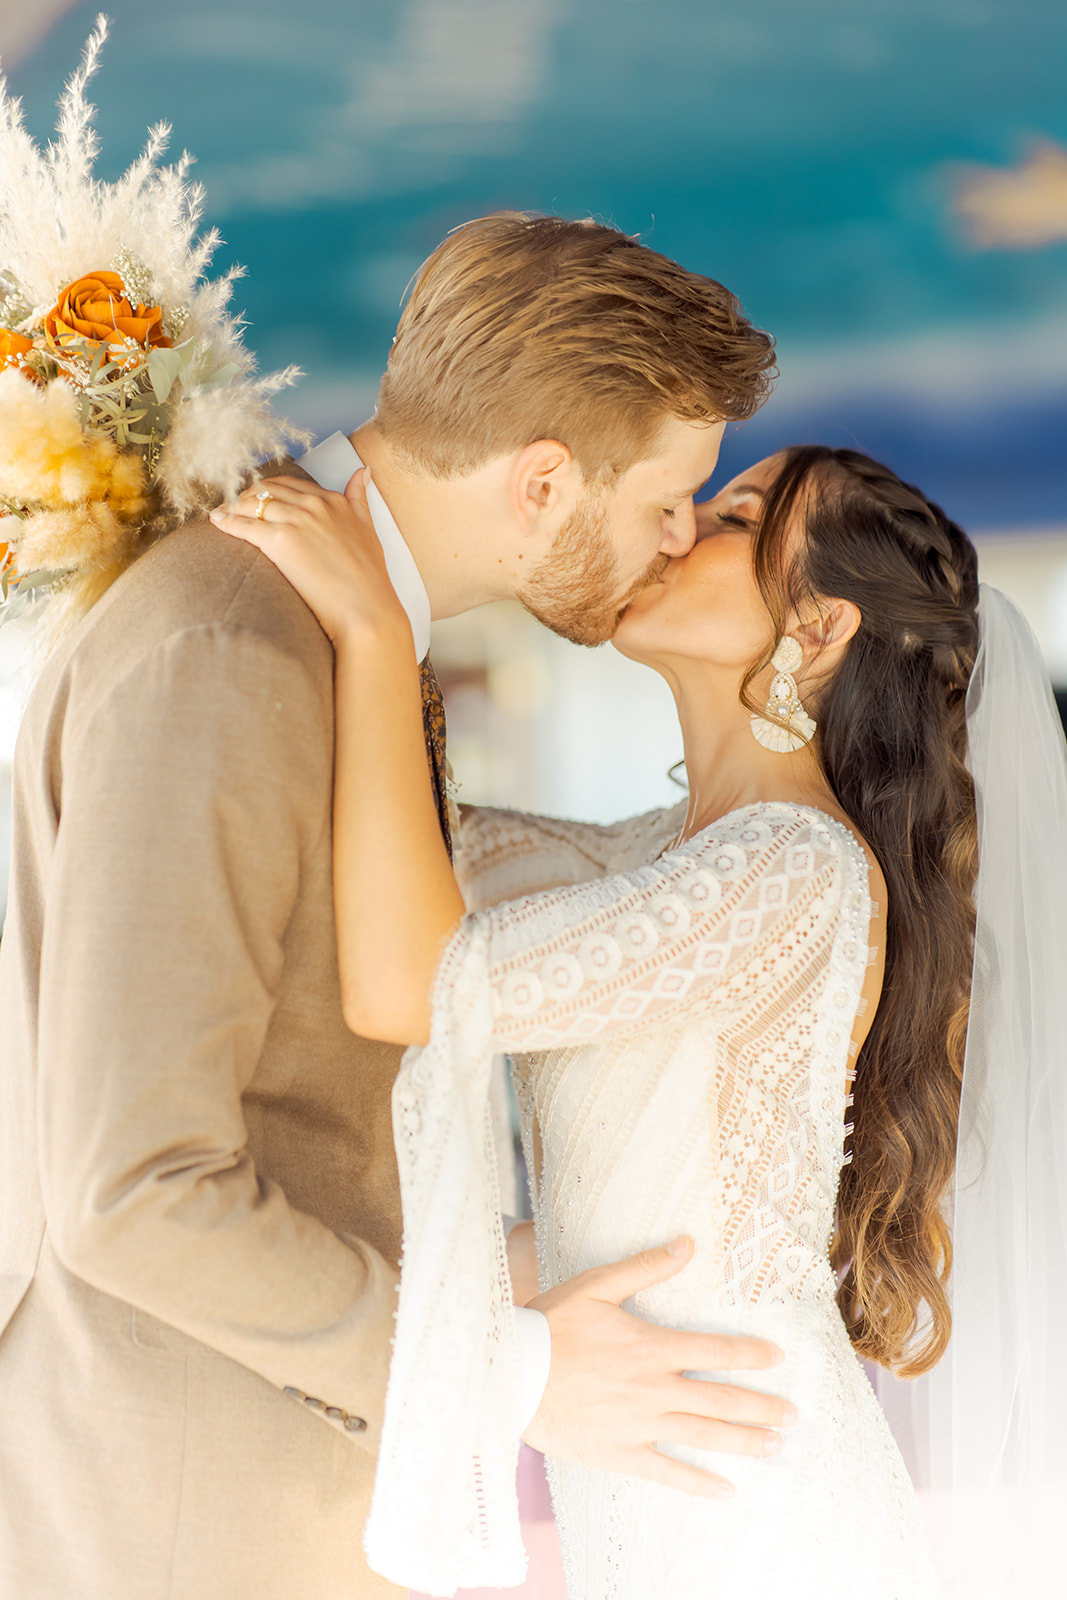 Bride in Detailed Boho Lace Dress Kissing Groom after Ceremony 